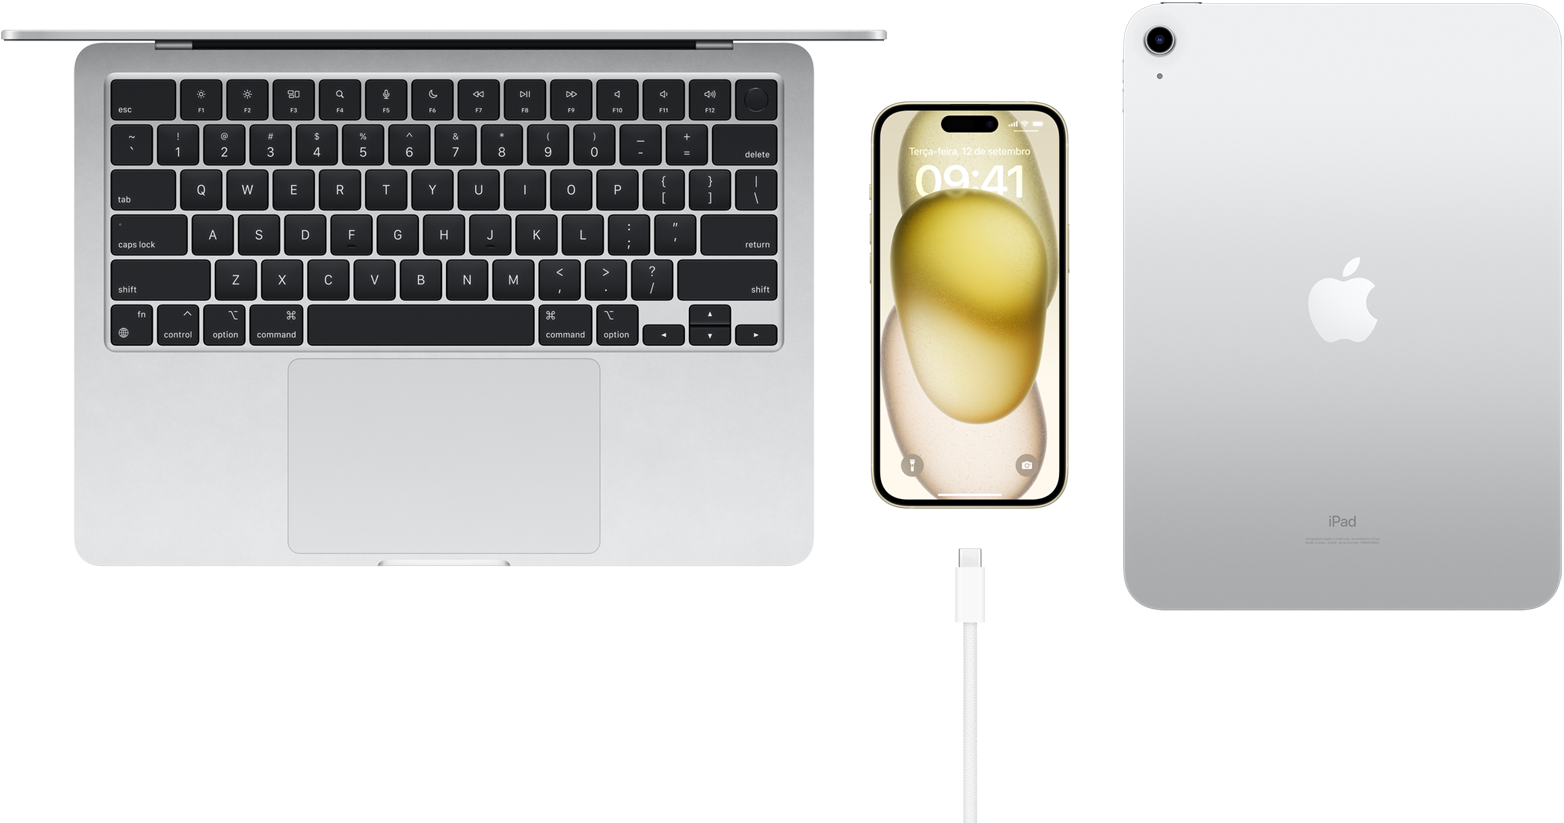 Top view of MacBook Pro, Phone 15 with a USB-C connector, and iPad